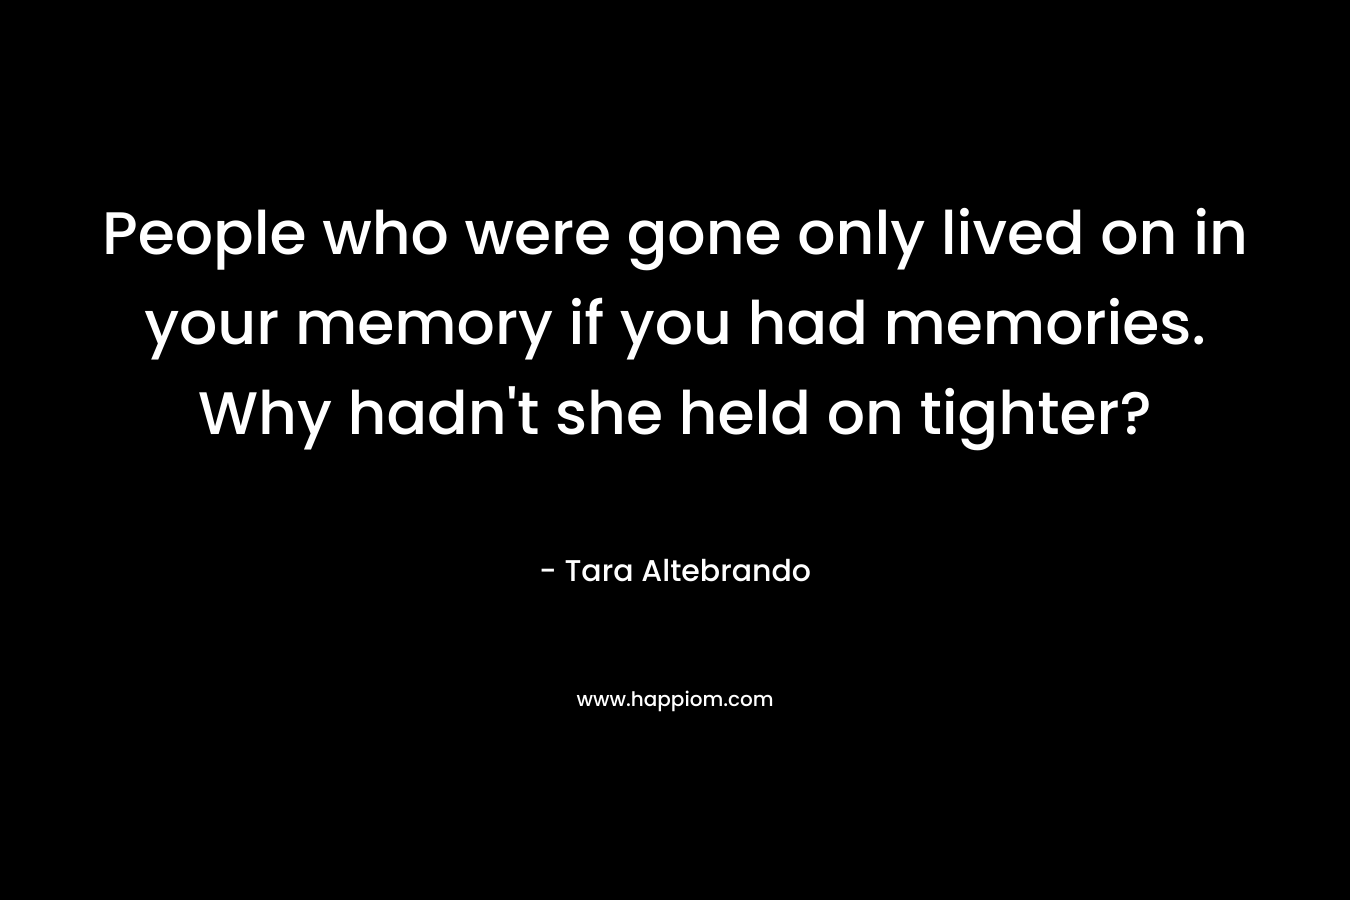 People who were gone only lived on in your memory if you had memories. Why hadn’t she held on tighter? – Tara Altebrando